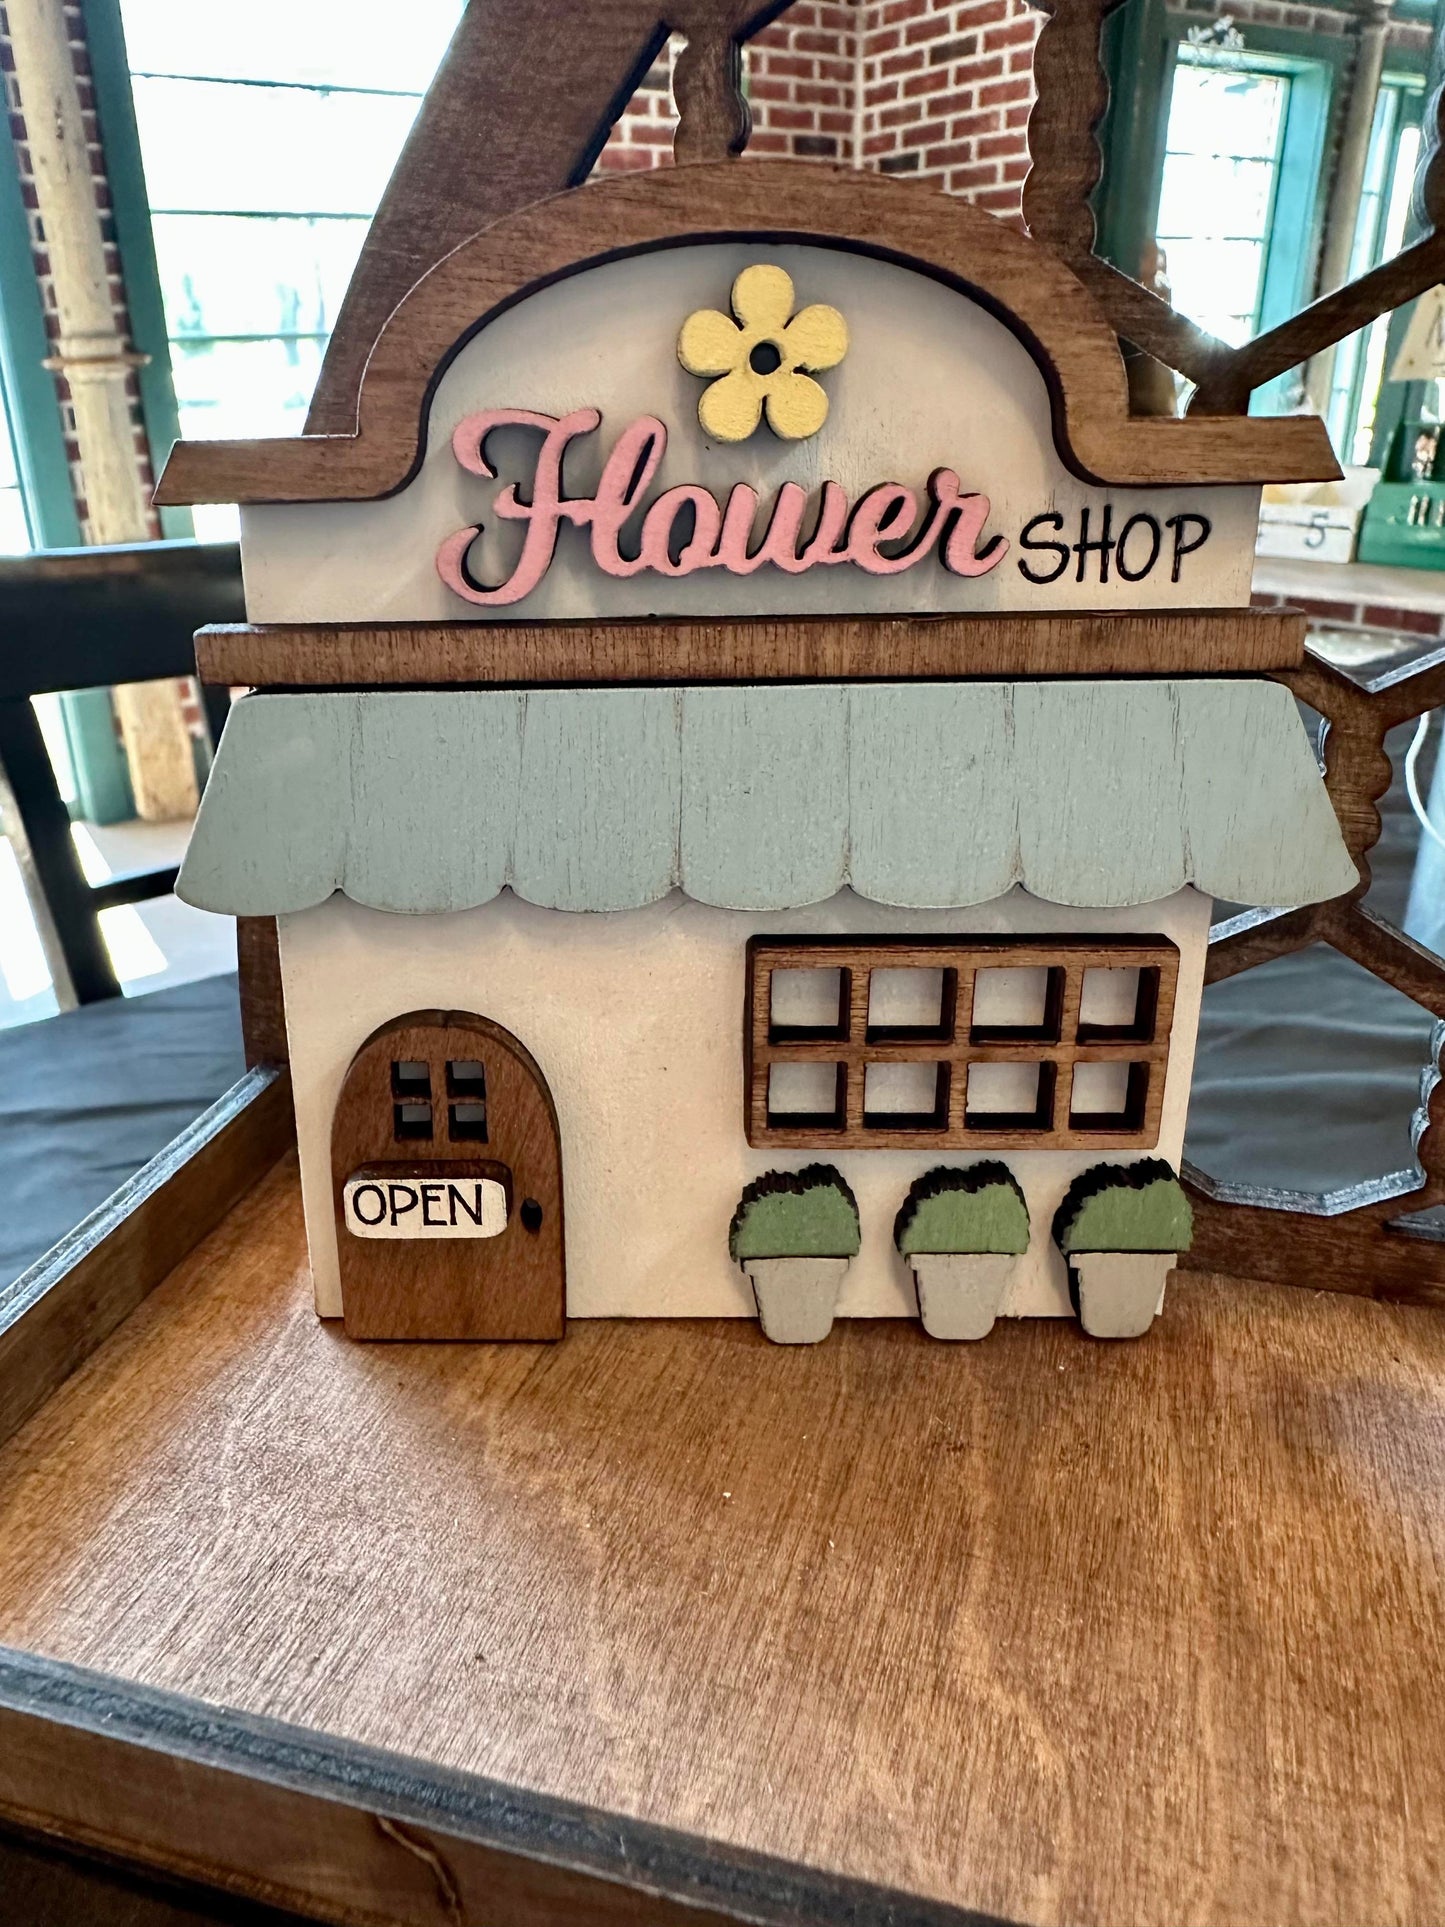 3D Tiered Tray Decor - Flower shop